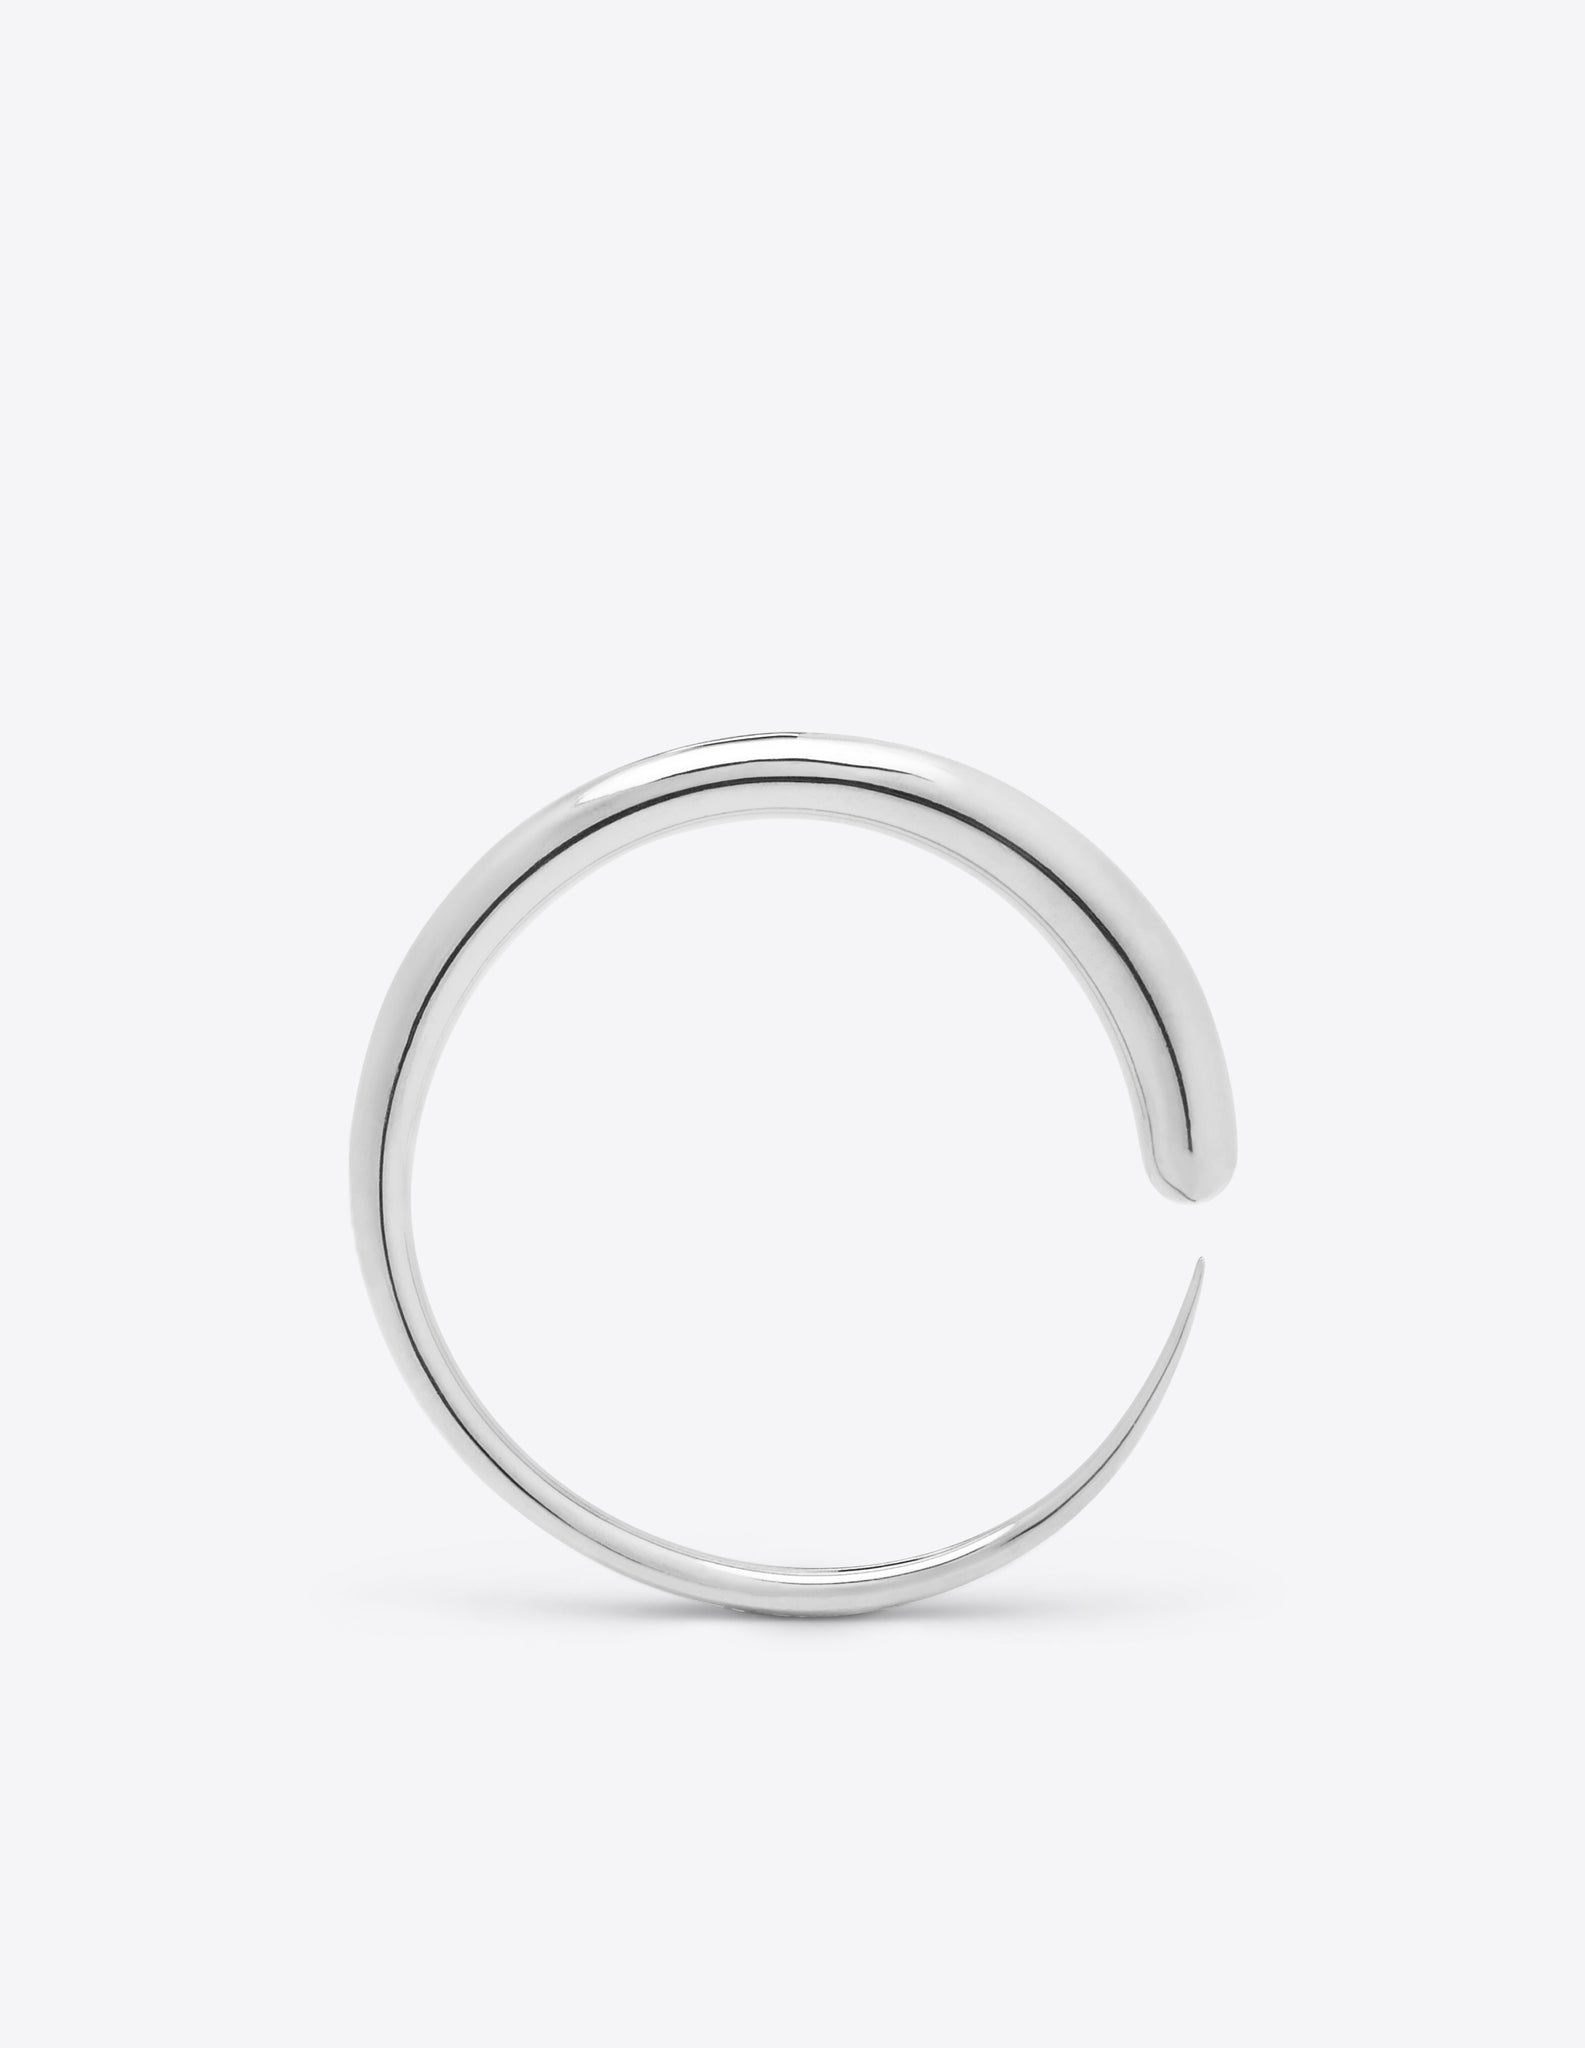 Khartoum Bangle Nude in Sterling Silver